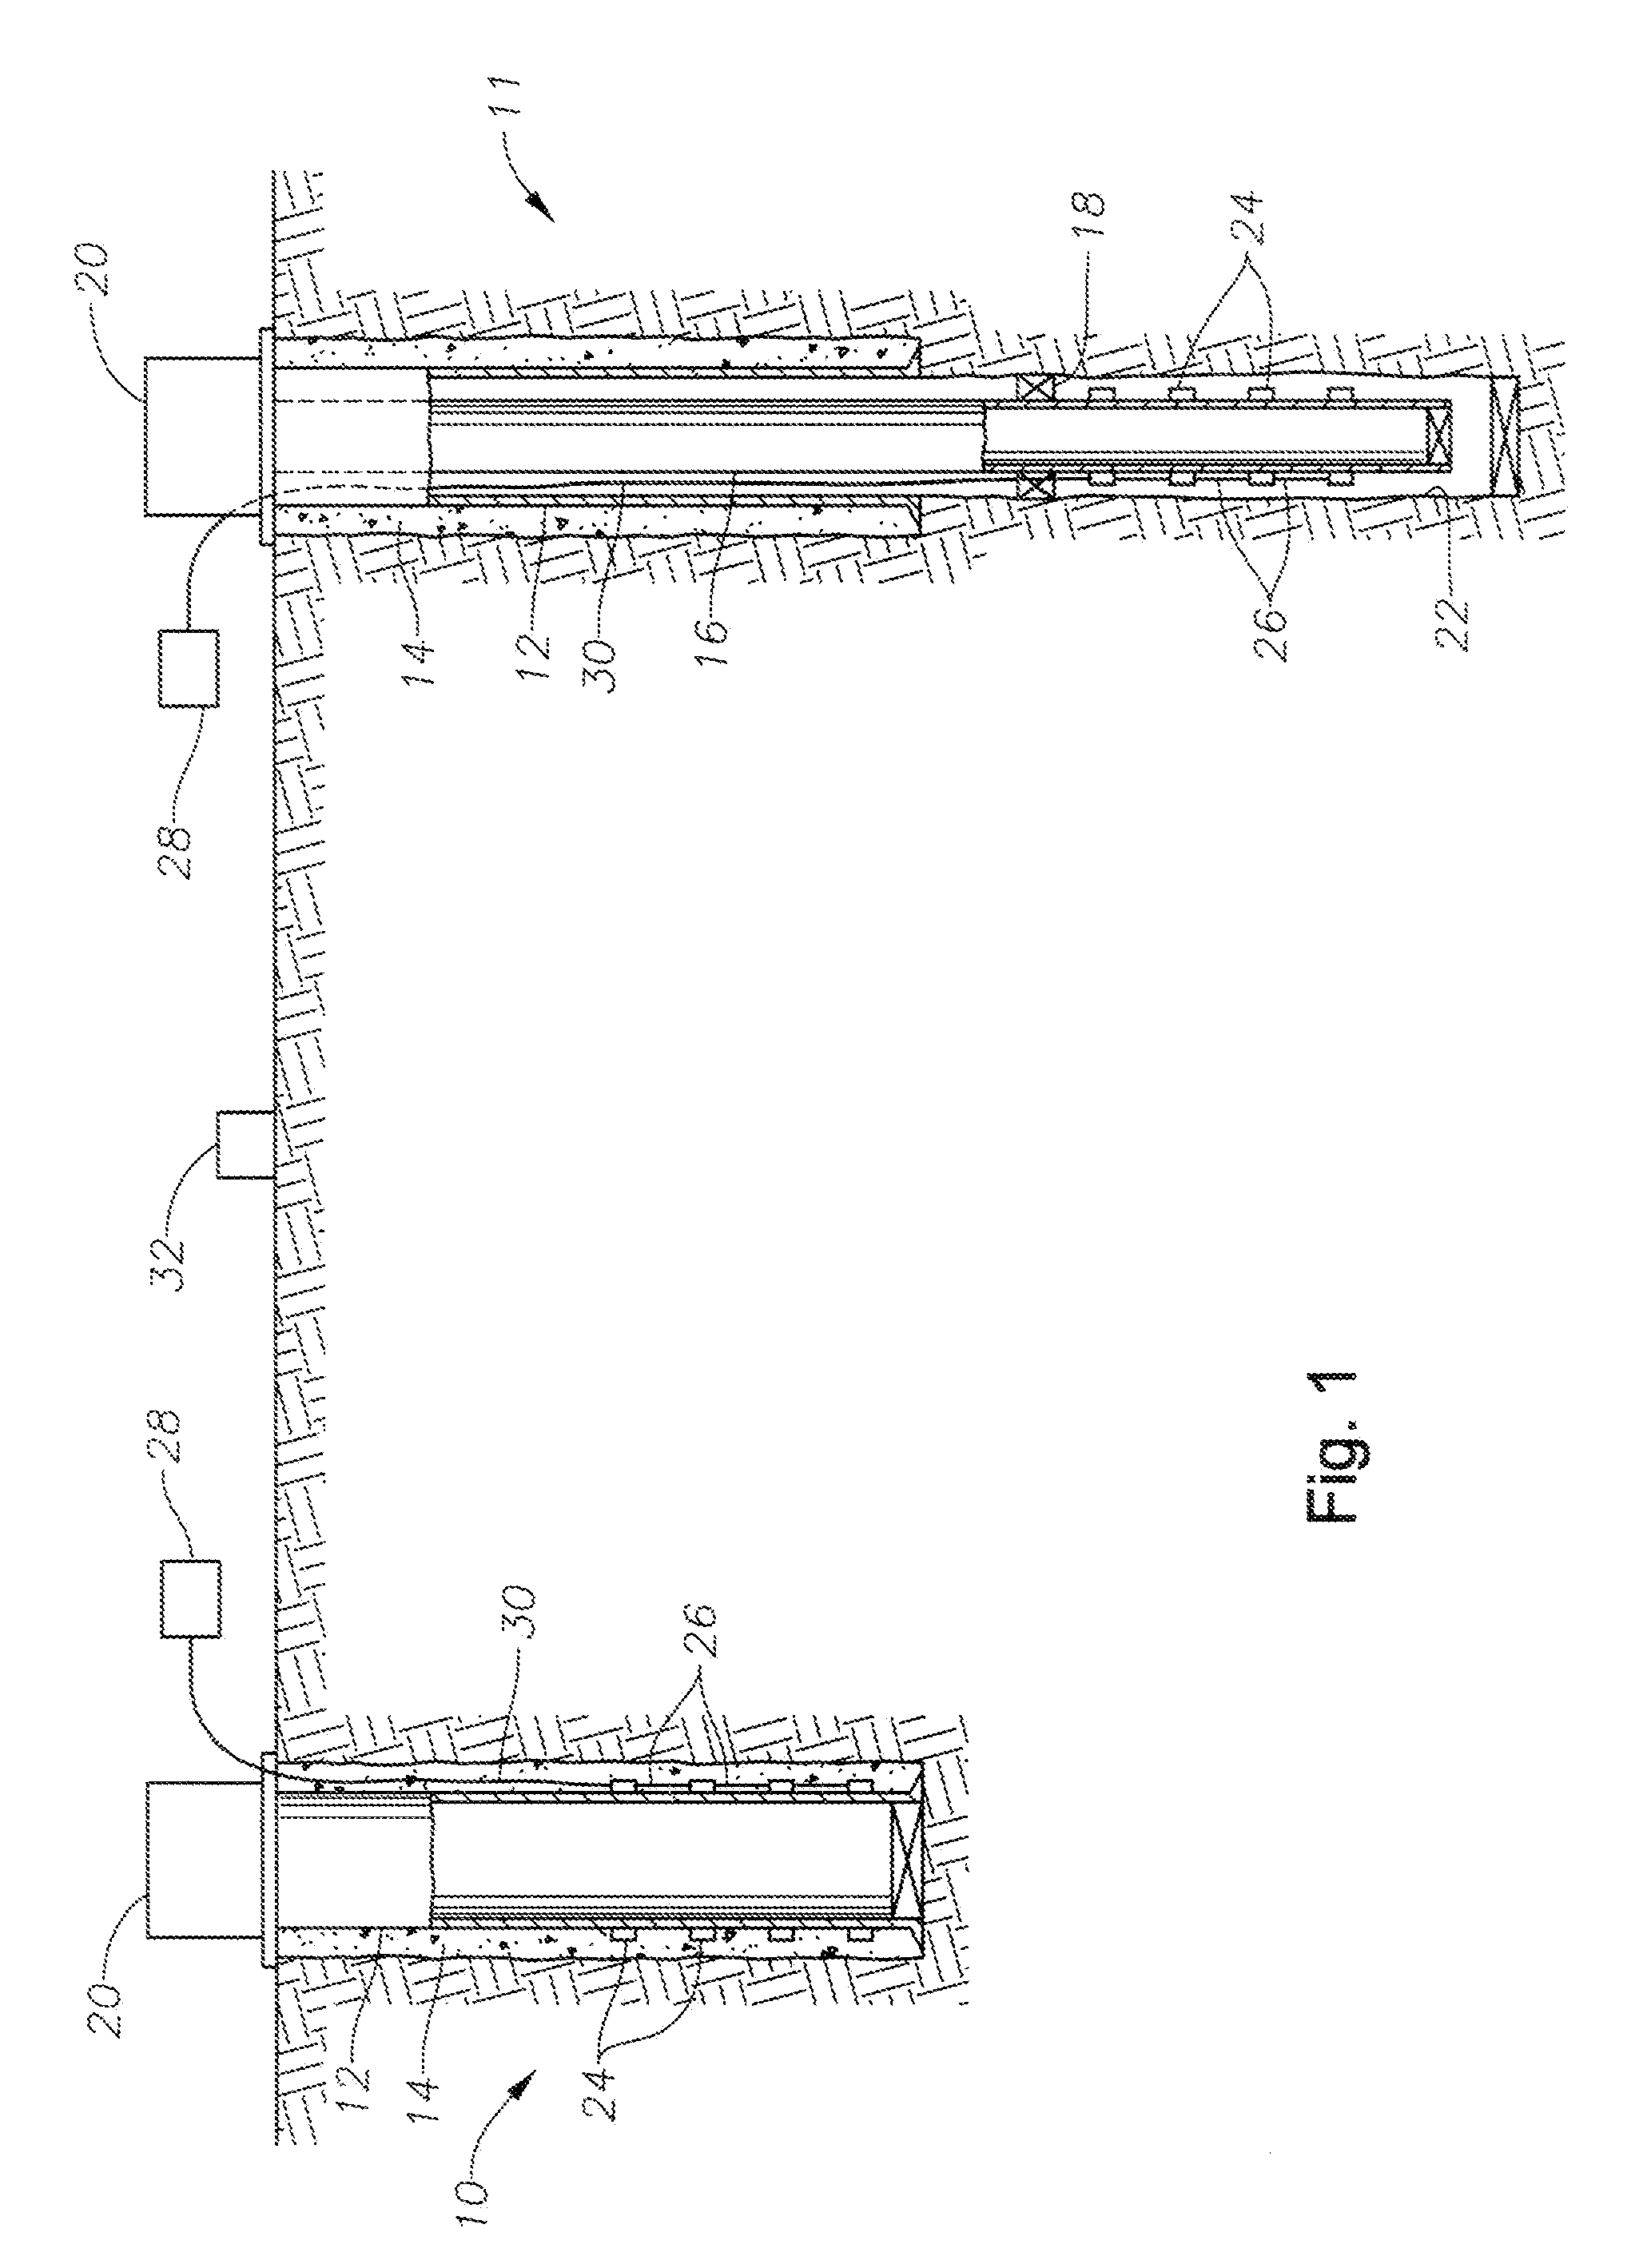 Apparatus and Method for Multi-Component Wellbore Electric Field Measurements Using Capacitive Sensors